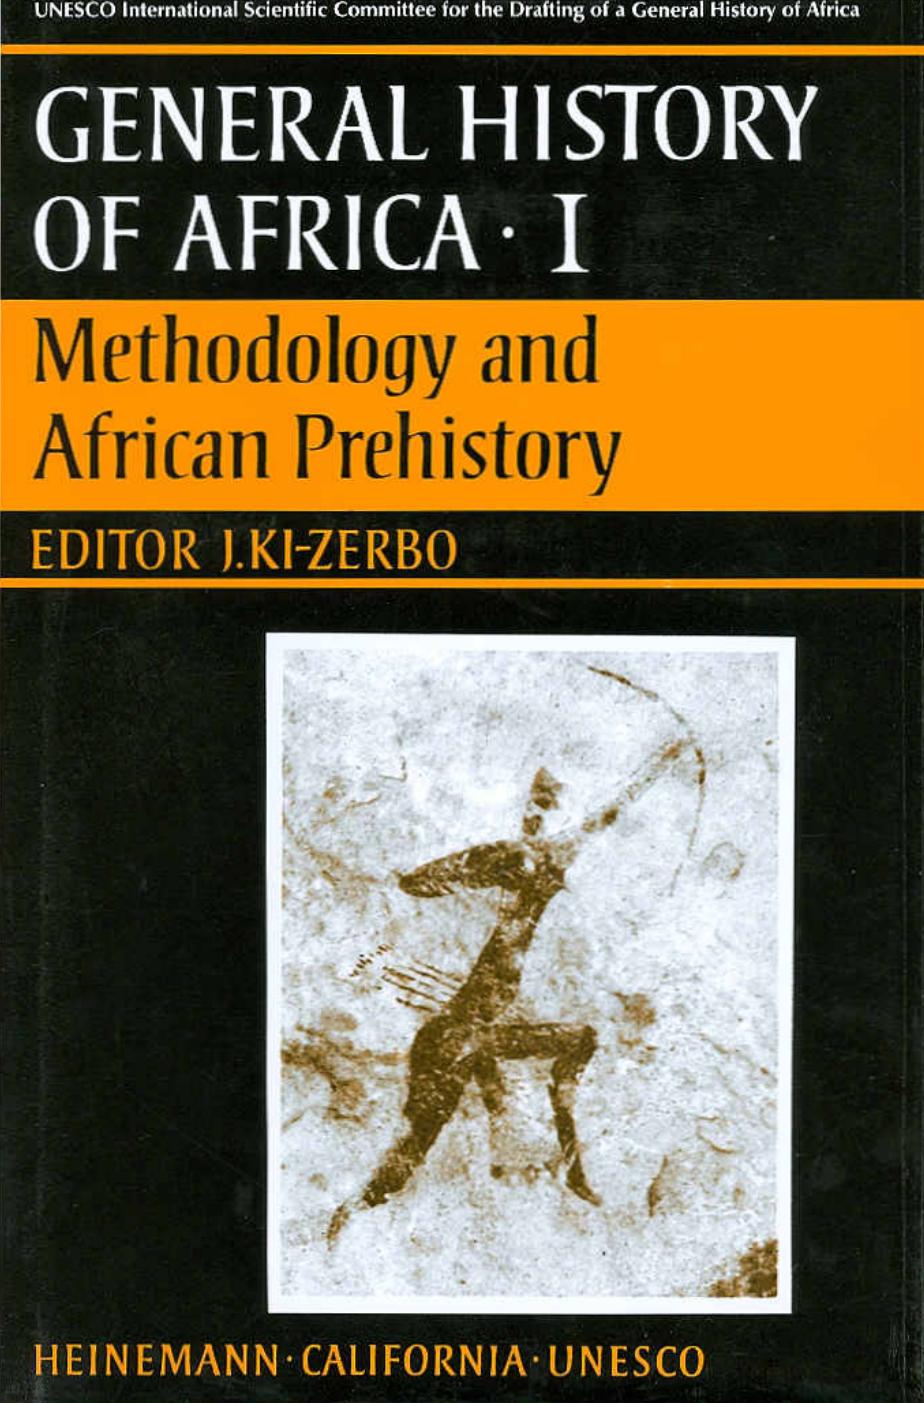 General history of Africa, I: Methodology and African prehistory; 1985